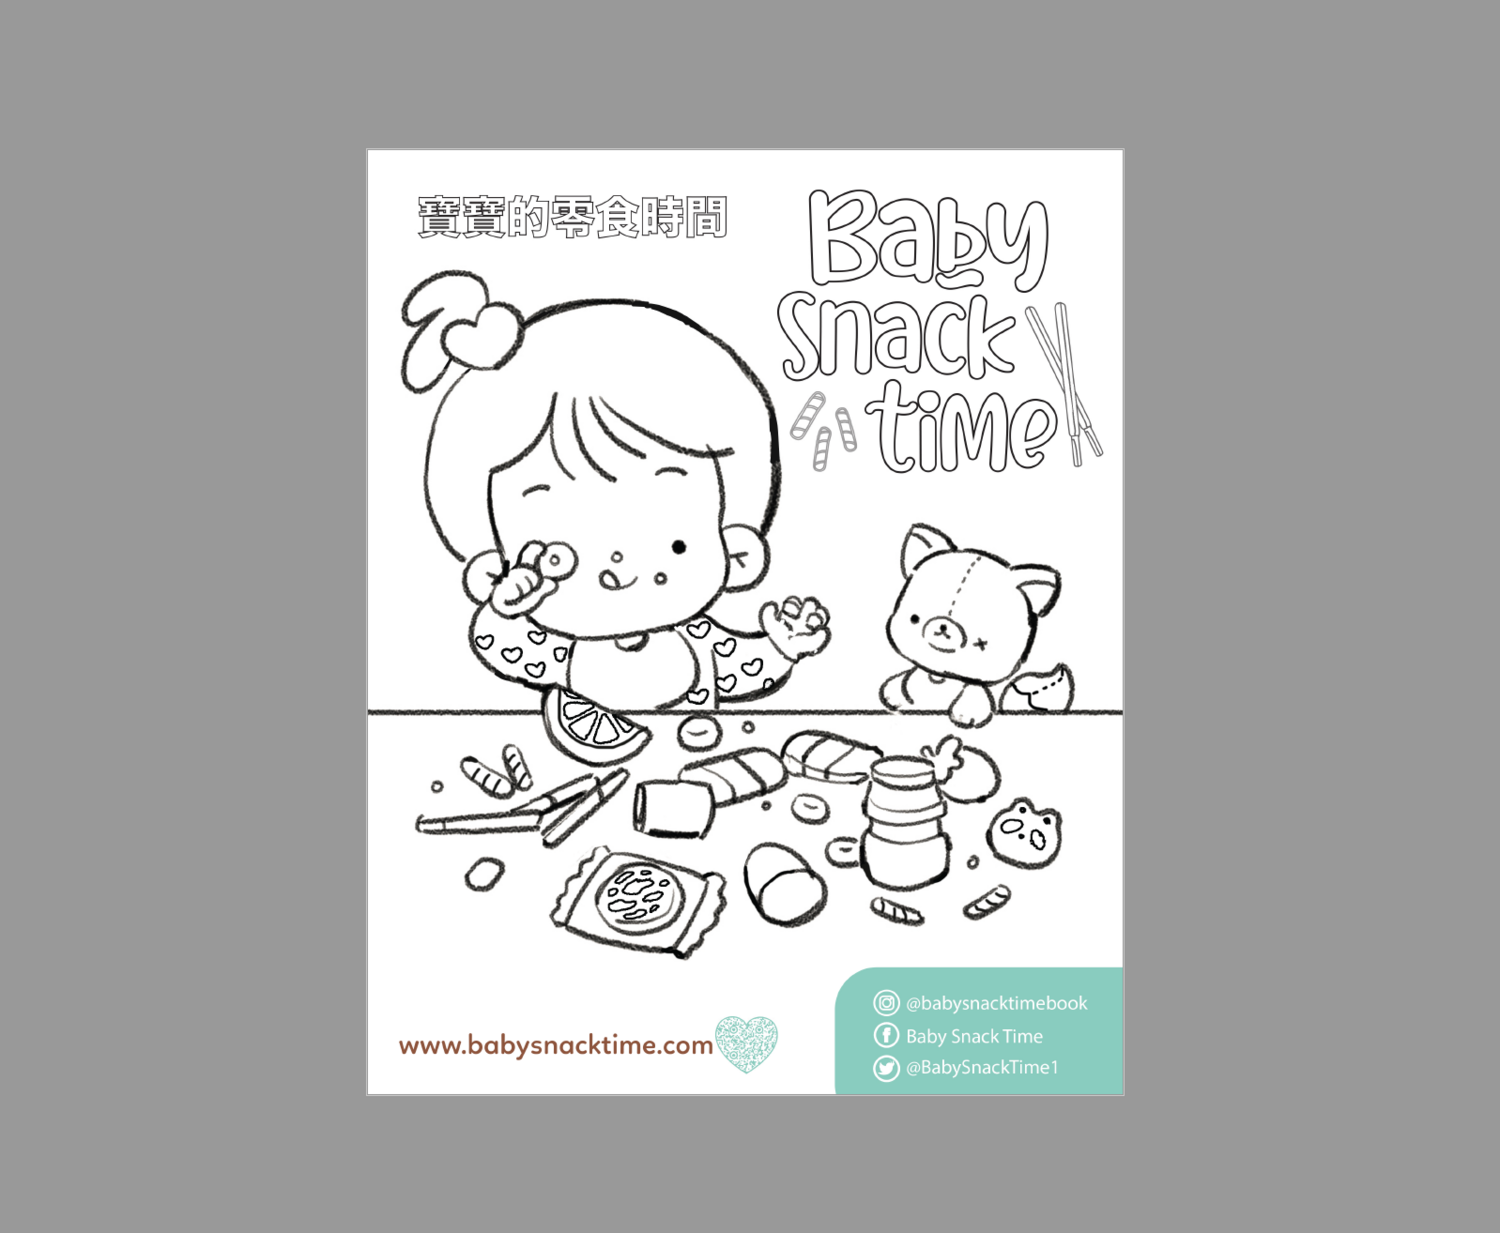 Baby Snack Time Coloring Sheet (Free Digital Download)